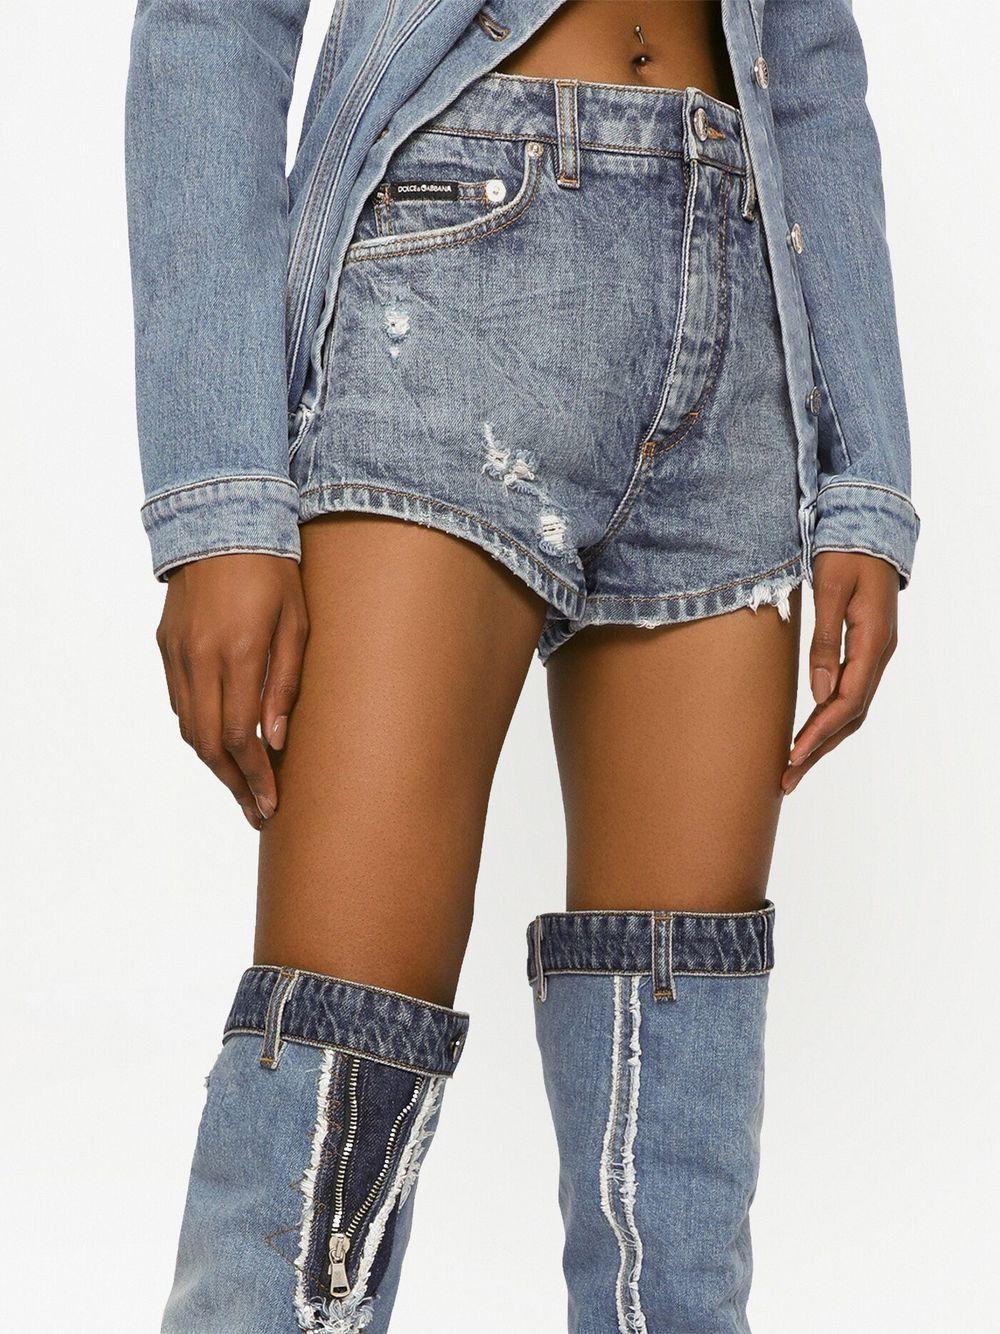 Dolce & Gabbana Denim Shorts With Ripped Details in Blue | Lyst